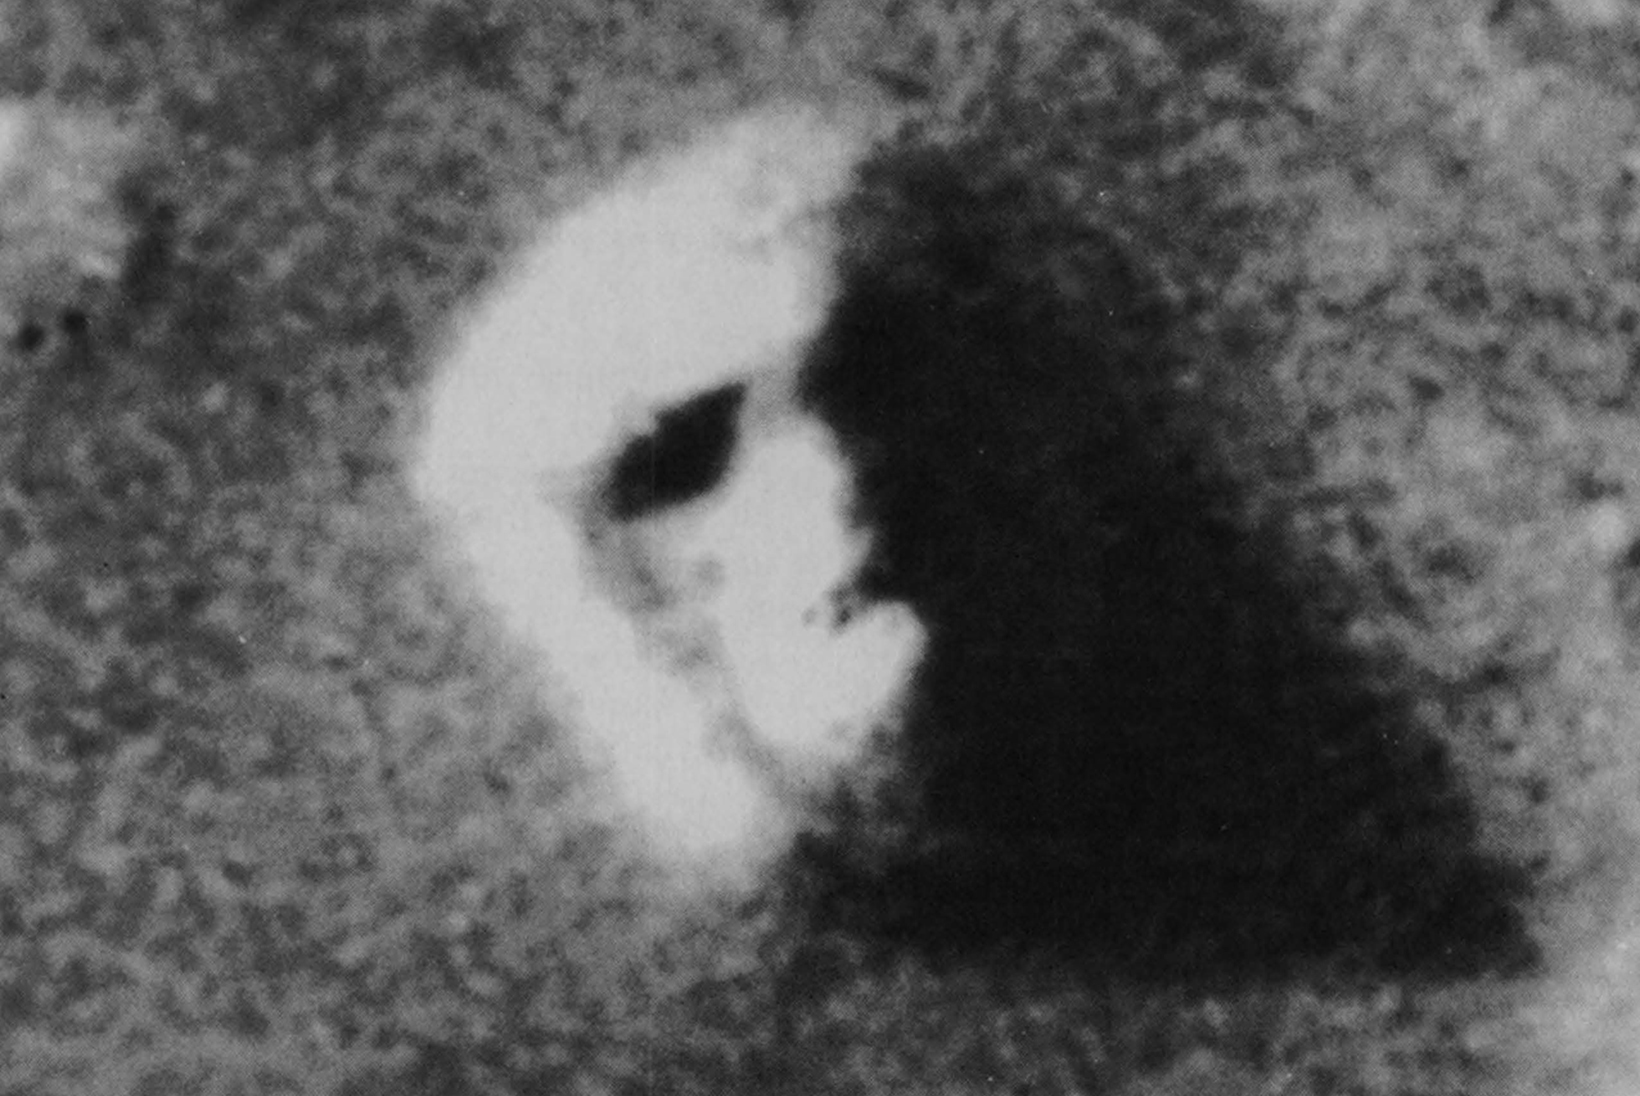 The “Face” On Mars